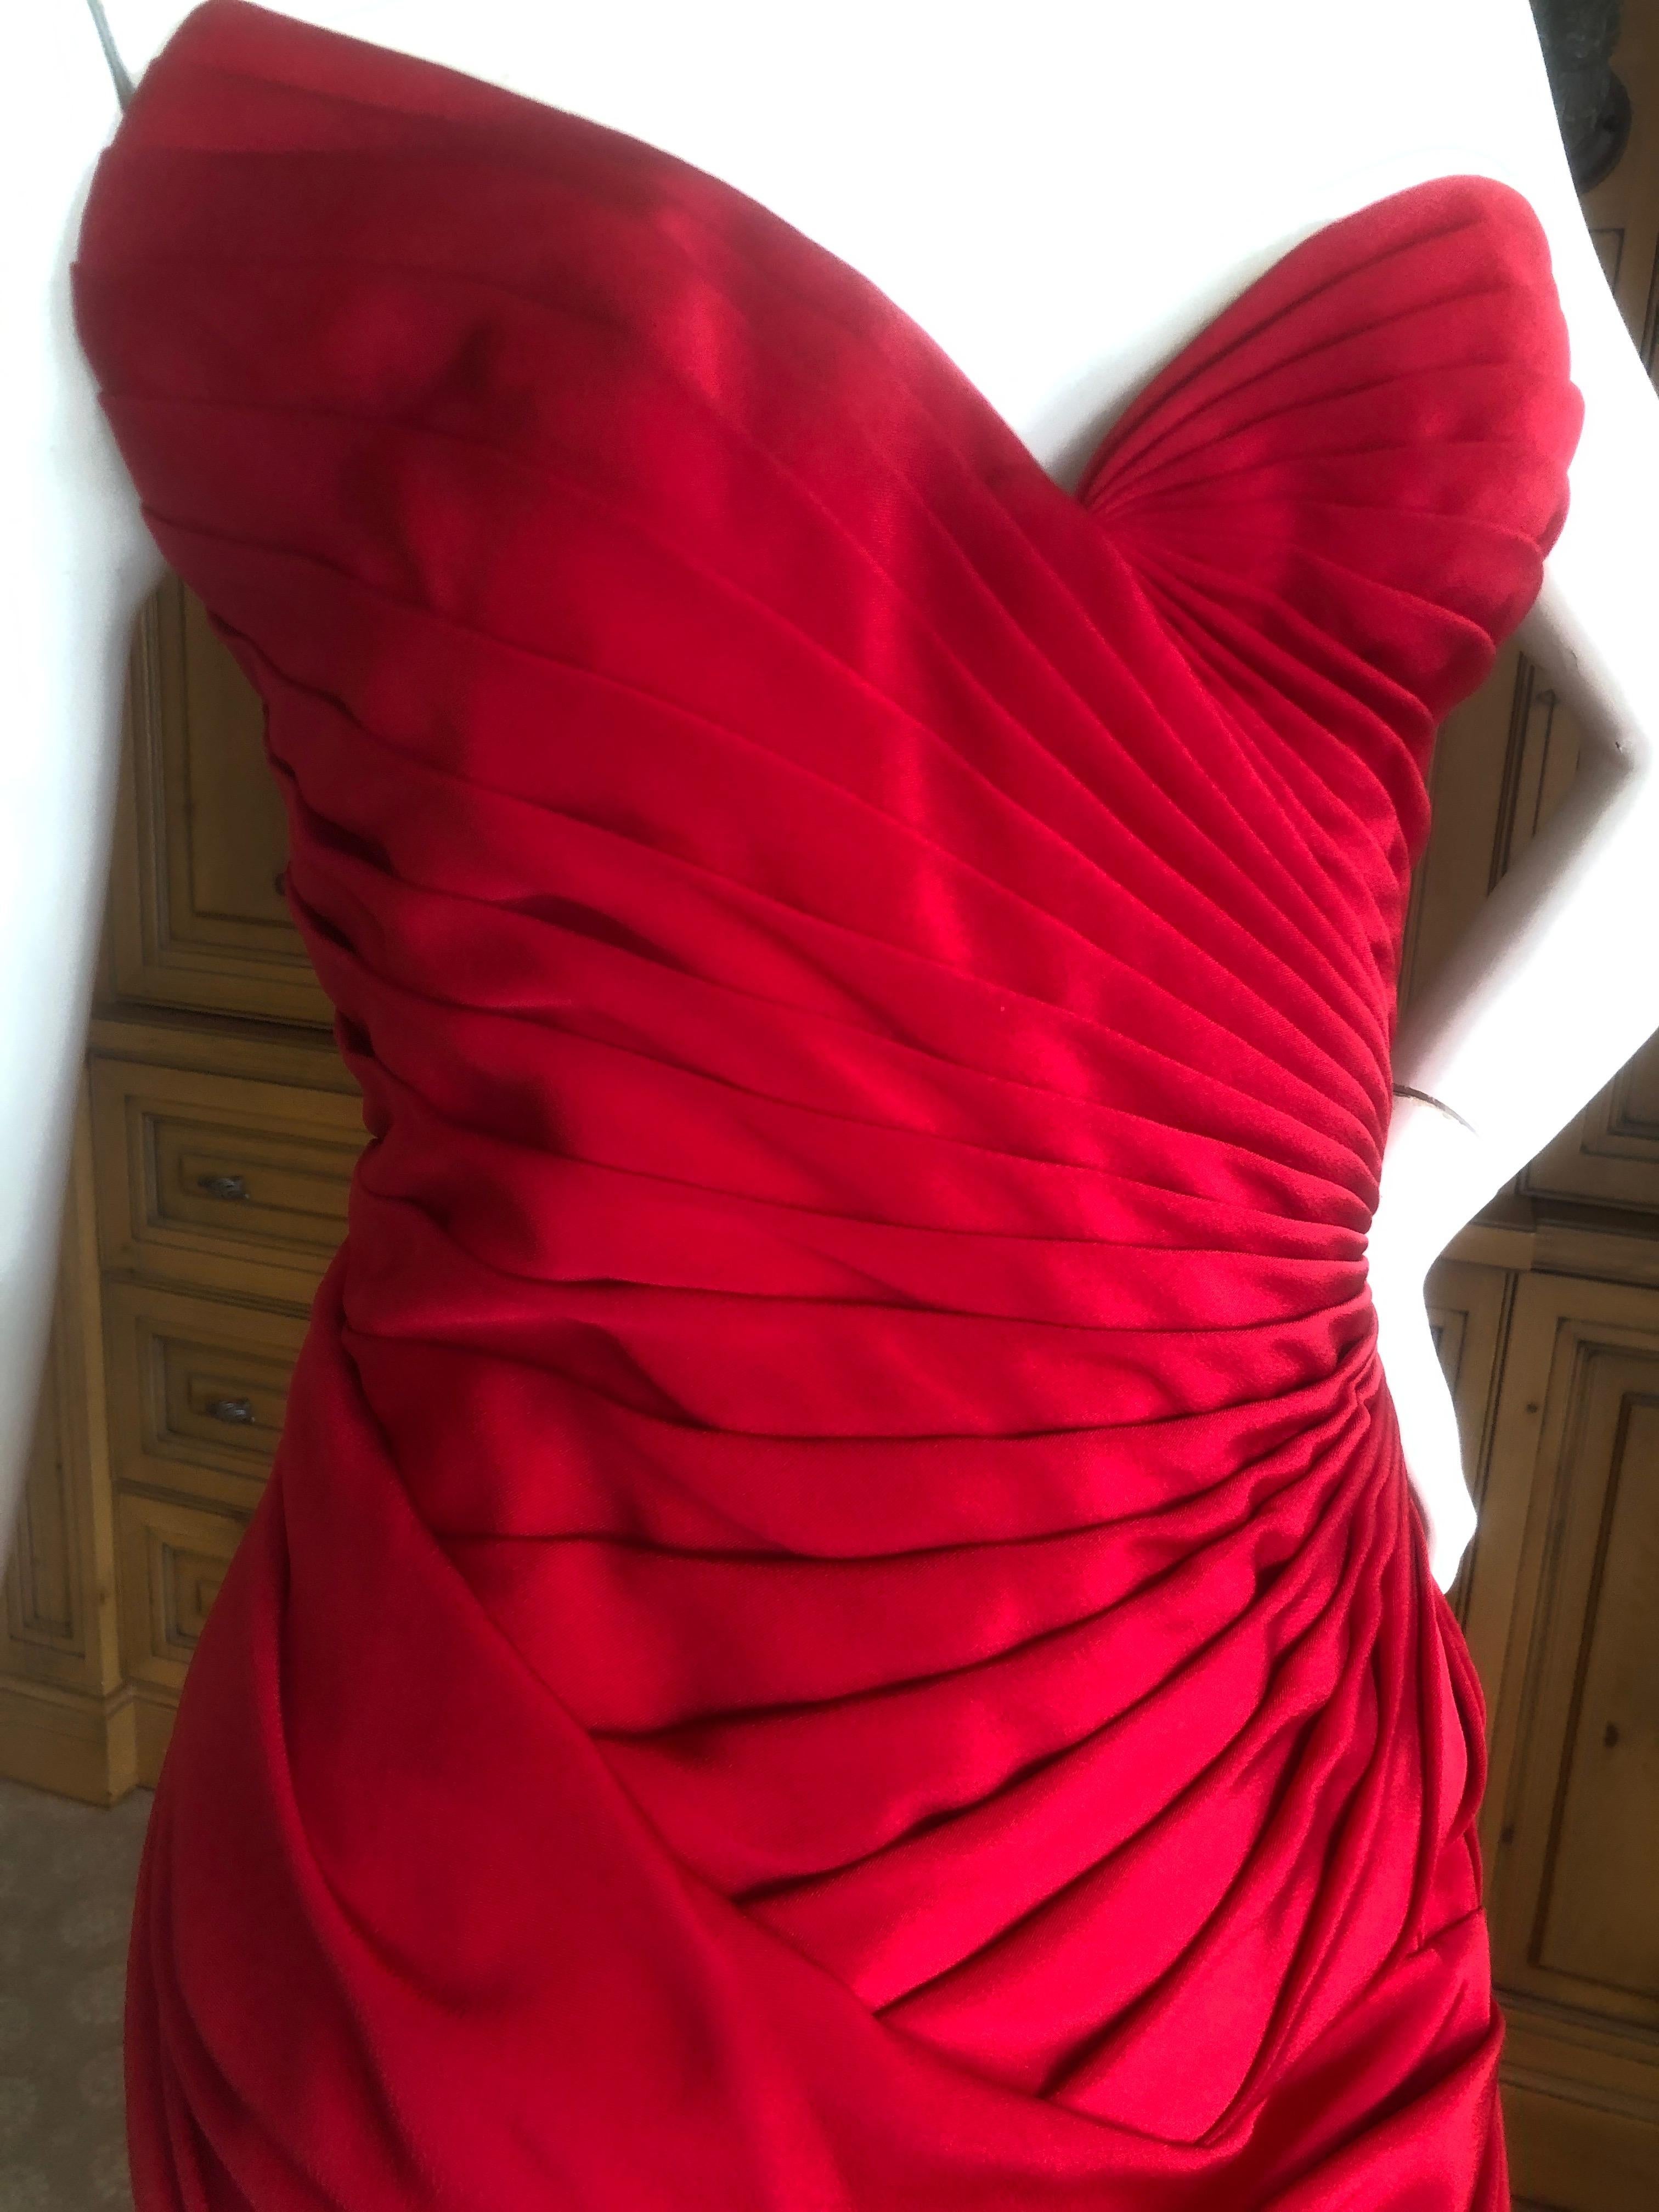 Emanuel Ungaro Numbered Haute Couture Fall 1984 Red  Strapless Evening Dress For Sale 4